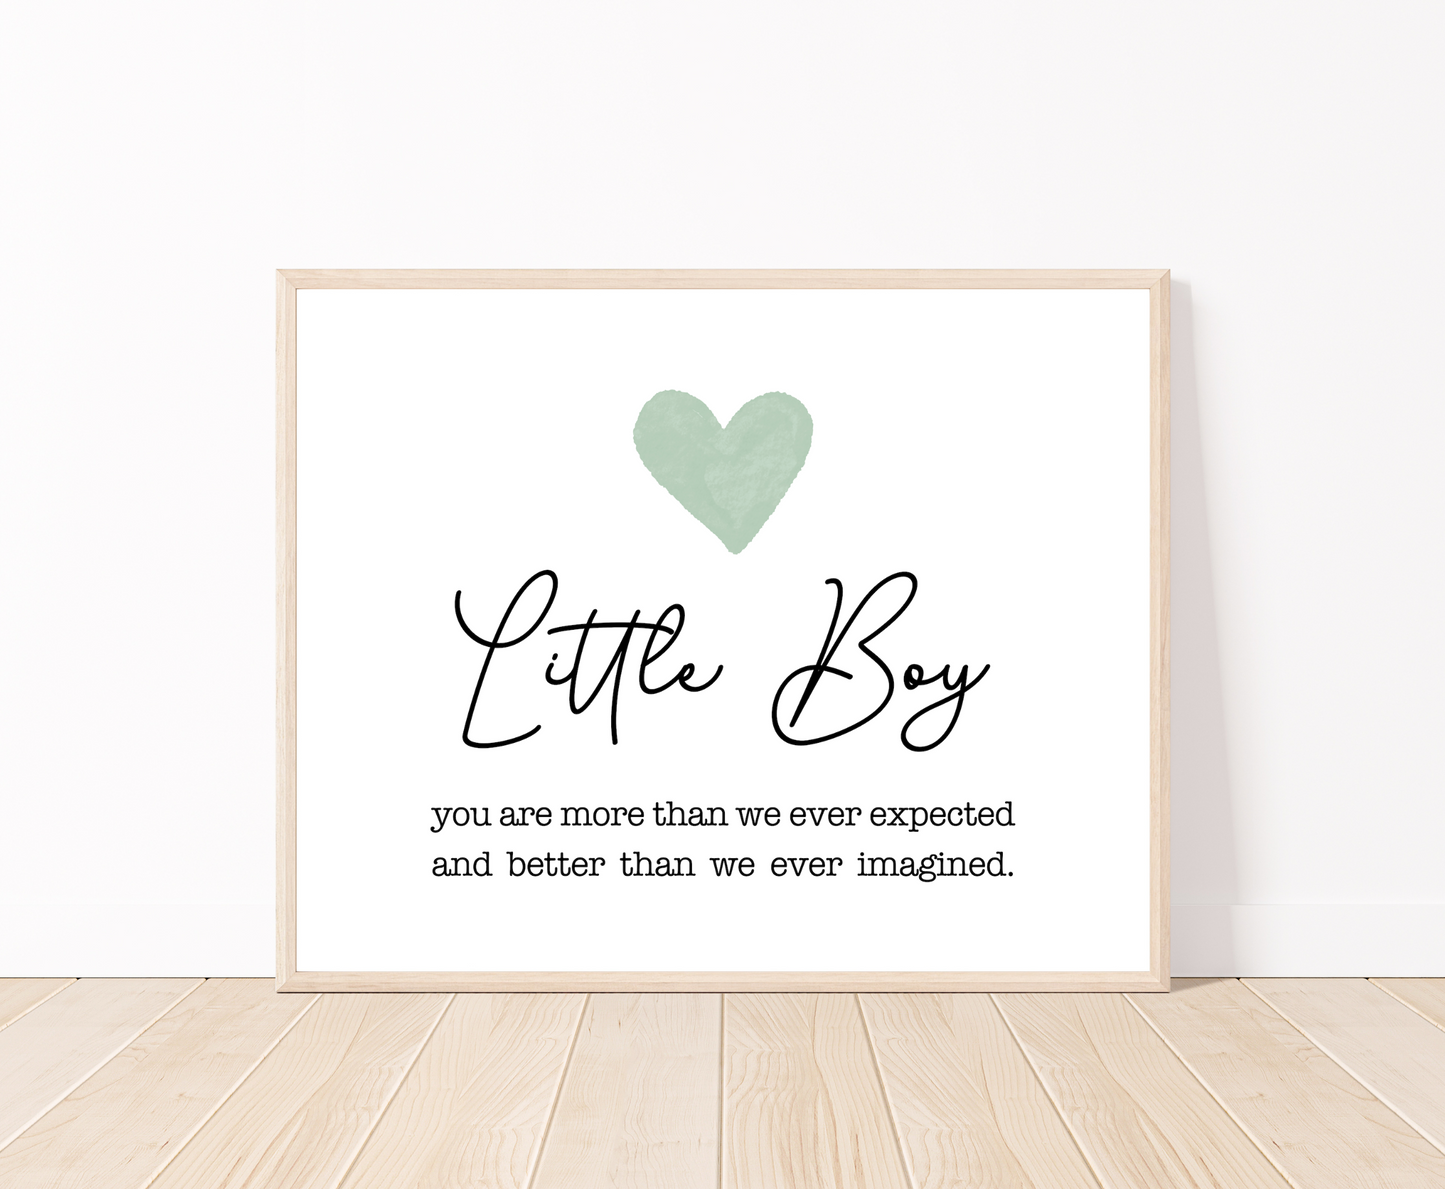 A frame displaying a baby green heart with a piece of writing below that says: you are more than we expected and better than we ever imagined. The frame is then placed on a parquet floor.